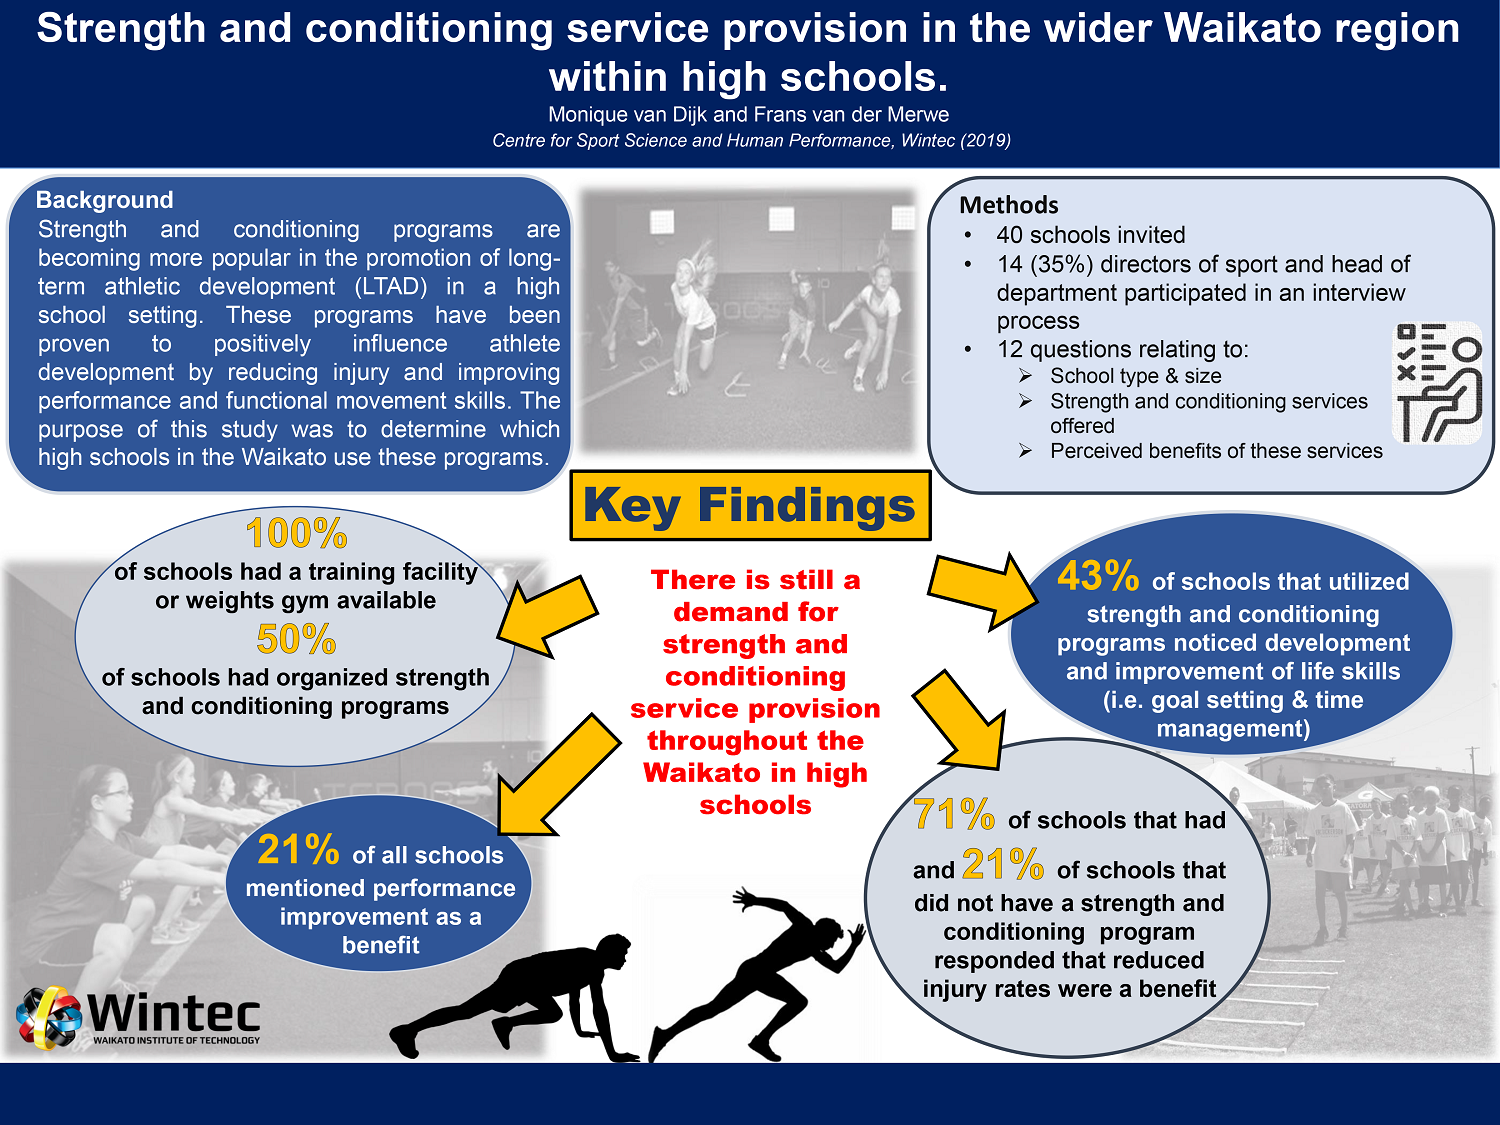 Strength and conditioning service provision in the wider Waikato region within high schools